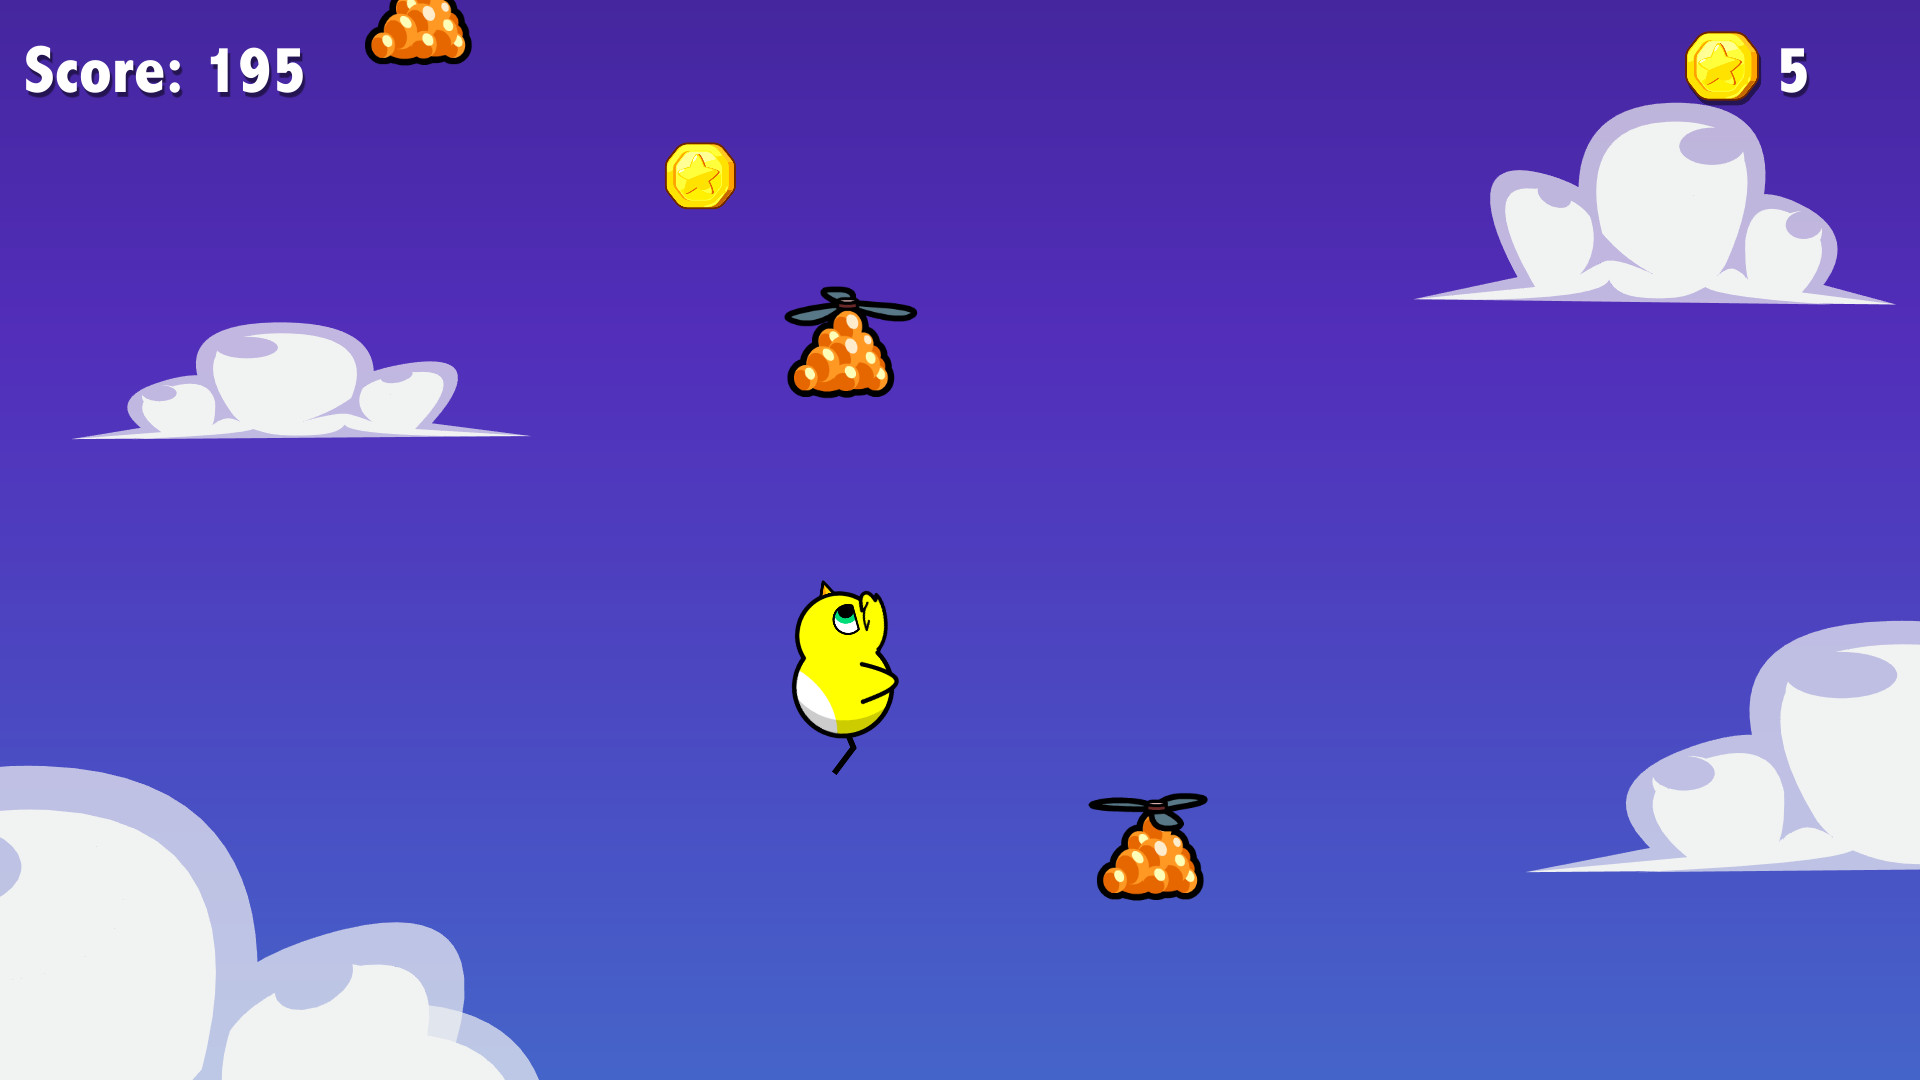 Duck Life 6: Space on the App Store